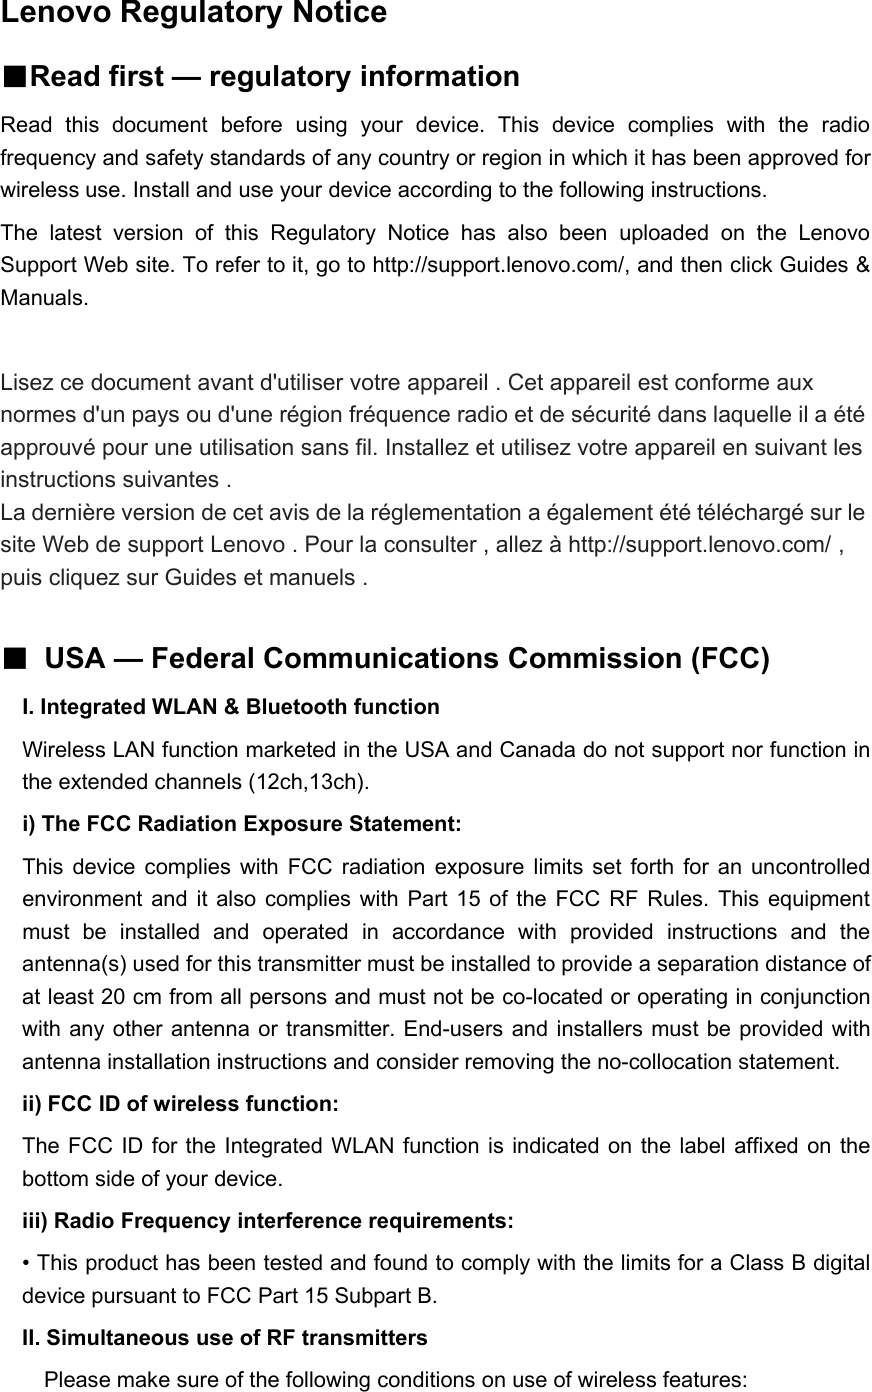 Lenovo Regulatory Notice■Read first — regulatory informationRead this document before using your device. This device complies with the radiofrequency and safety standards of any country or region in which it has been approved forwireless use. Install and use your device according to the following instructions.The latest version of this Regulatory Notice has also been uploaded on the LenovoSupport Web site. To refer to it, go to http://support.lenovo.com/, and then click Guides &amp;Manuals.Lisez ce document avant d&apos;utiliser votre appareil . Cet appareil est conforme auxnormes d&apos;un pays ou d&apos;une région fréquence radio et de sécurité dans laquelle il a étéapprouvé pour une utilisation sans fil. Installez et utilisez votre appareil en suivant lesinstructions suivantes .La dernière version de cet avis de la réglementation a également été téléchargé sur lesite Web de support Lenovo . Pour la consulter , allez à http://support.lenovo.com/ ,puis cliquez sur Guides et manuels .■USA — Federal Communications Commission (FCC)I. Integrated WLAN &amp; Bluetooth functionWireless LAN function marketed in the USA and Canada do not support nor function inthe extended channels (12ch,13ch).i) The FCC Radiation Exposure Statement:This device complies with FCC radiation exposure limits set forth for an uncontrolledenvironment and it also complies with Part 15 of the FCC RF Rules. This equipmentmust be installed and operated in accordance with provided instructions and theantenna(s) used for this transmitter must be installed to provide a separation distance ofat least 20 cm from all persons and must not be co-located or operating in conjunctionwith any other antenna or transmitter. End-users and installers must be provided withantenna installation instructions and consider removing the no-collocation statement.ii) FCC ID of wireless function:The FCC ID for the Integrated WLAN function is indicated on the label affixedonthebottom side of your device.iii) Radio Frequency interference requirements:• This product has been tested and found to comply with the limits for a Class B digitaldevice pursuant to FCC Part 15 Subpart B.II. Simultaneous use of RF transmittersPlease make sure of the following conditions on use of wireless features: